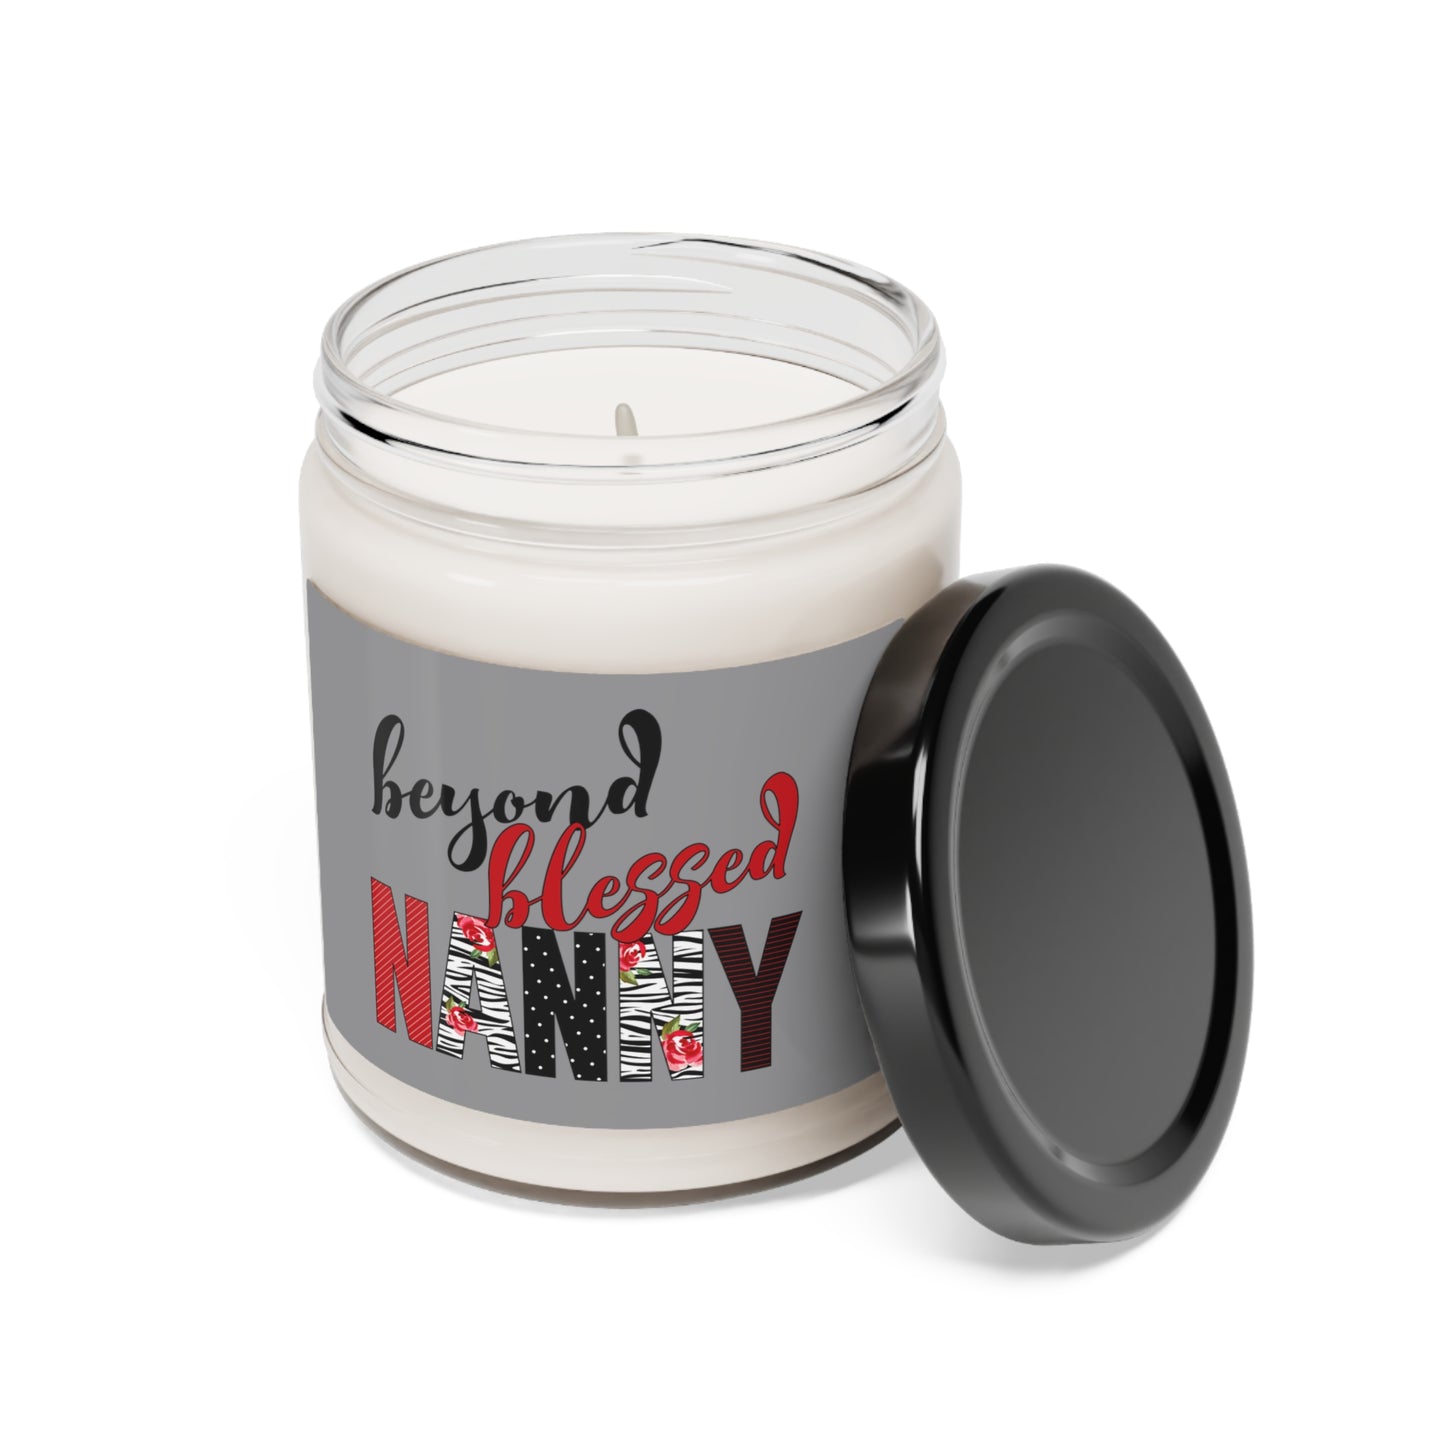 Beyond Blessed Scented Soy Candle, 9oz